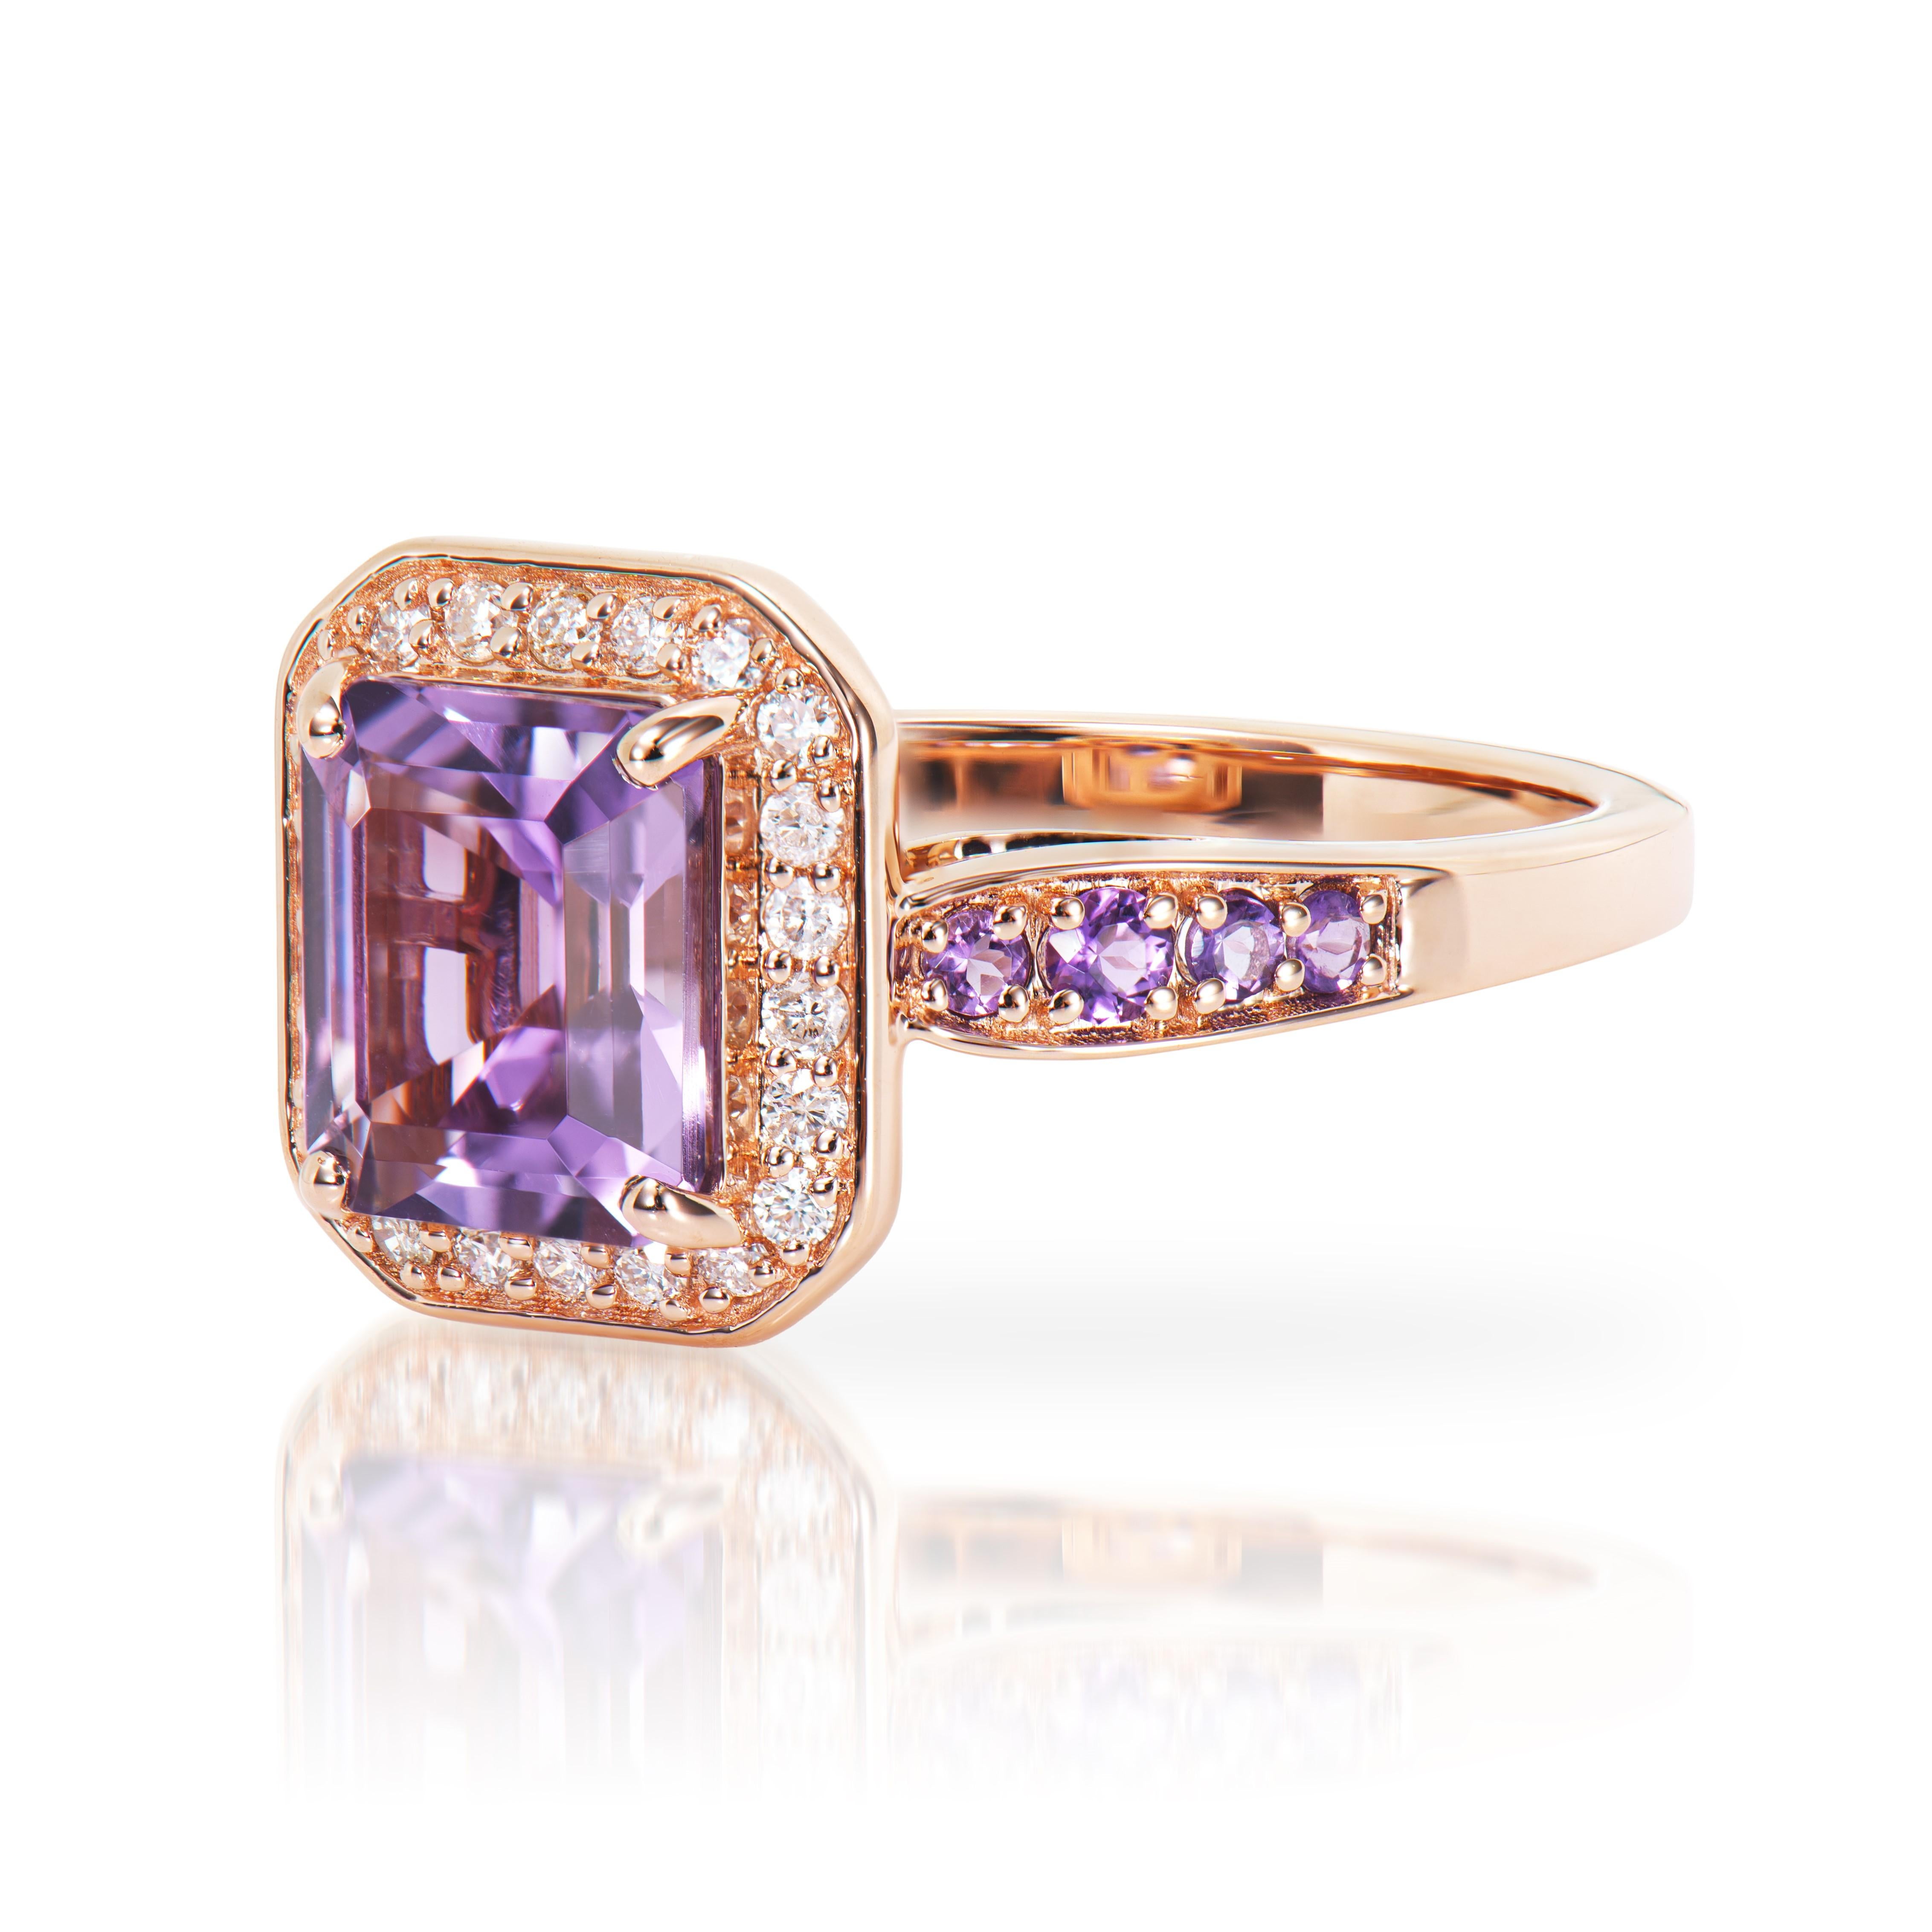 Octagon Cut 1.74 Carat Amethyst Fancy Ring in 14Karat Rose Gold with White Diamond.   For Sale